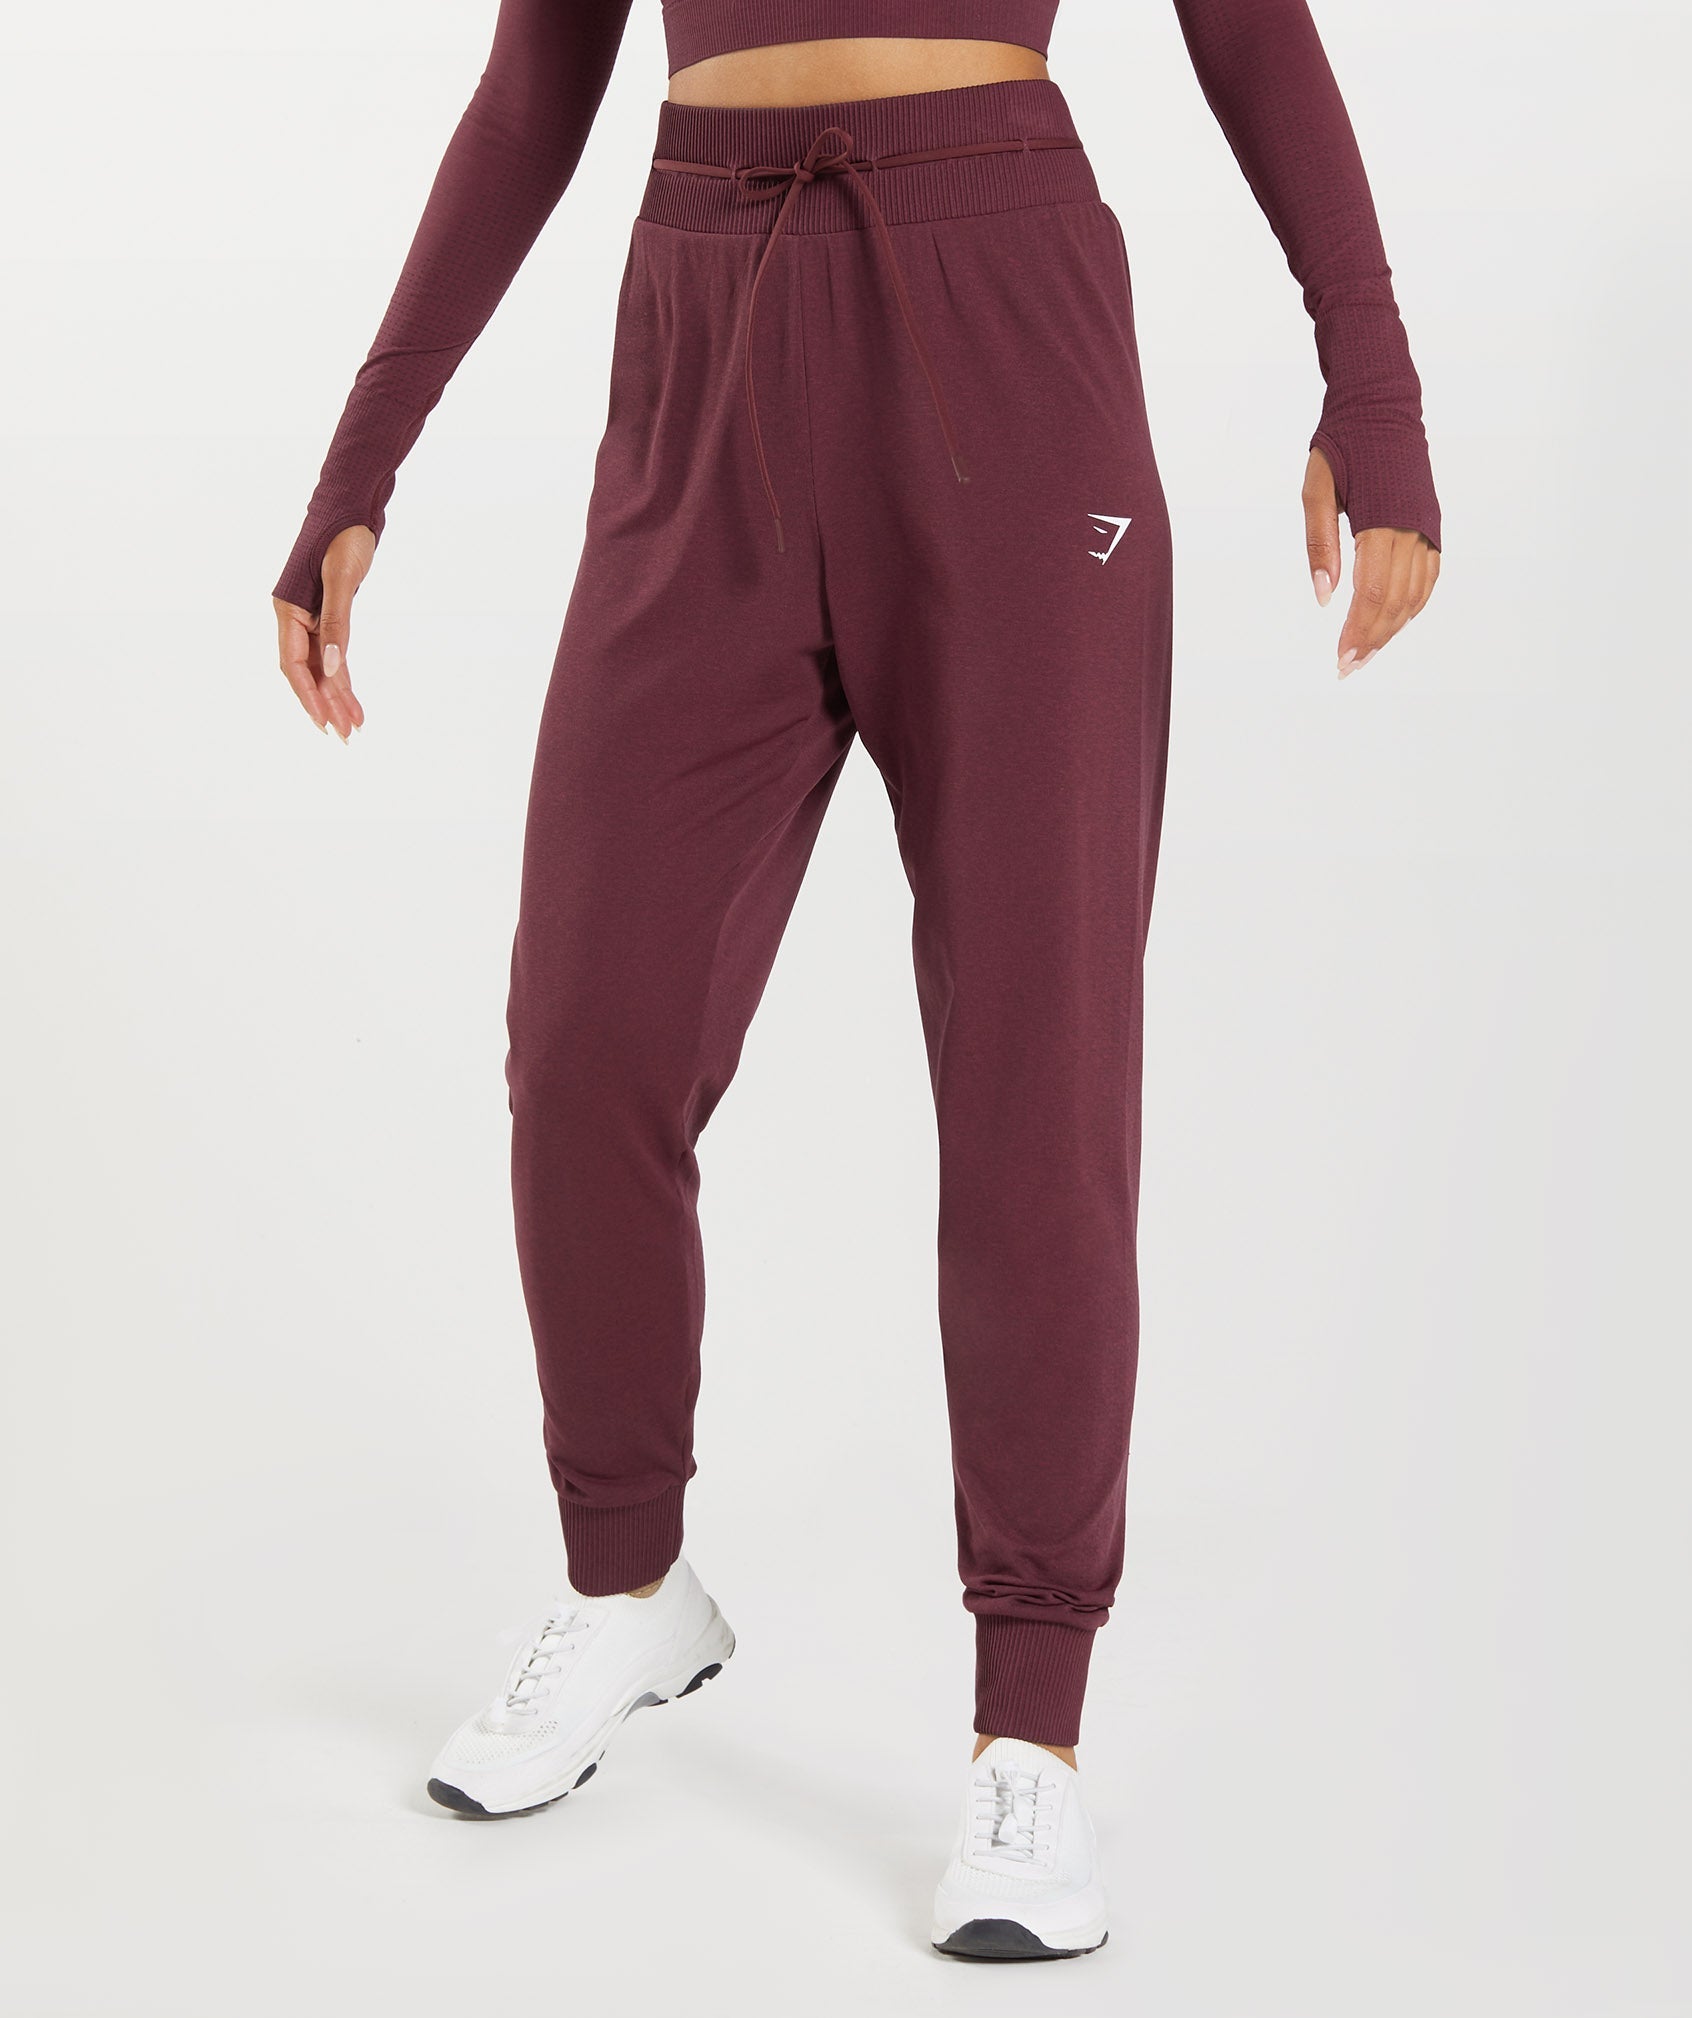 Vital Seamless 2.0 Joggers in Baked Maroon Marl - view 1